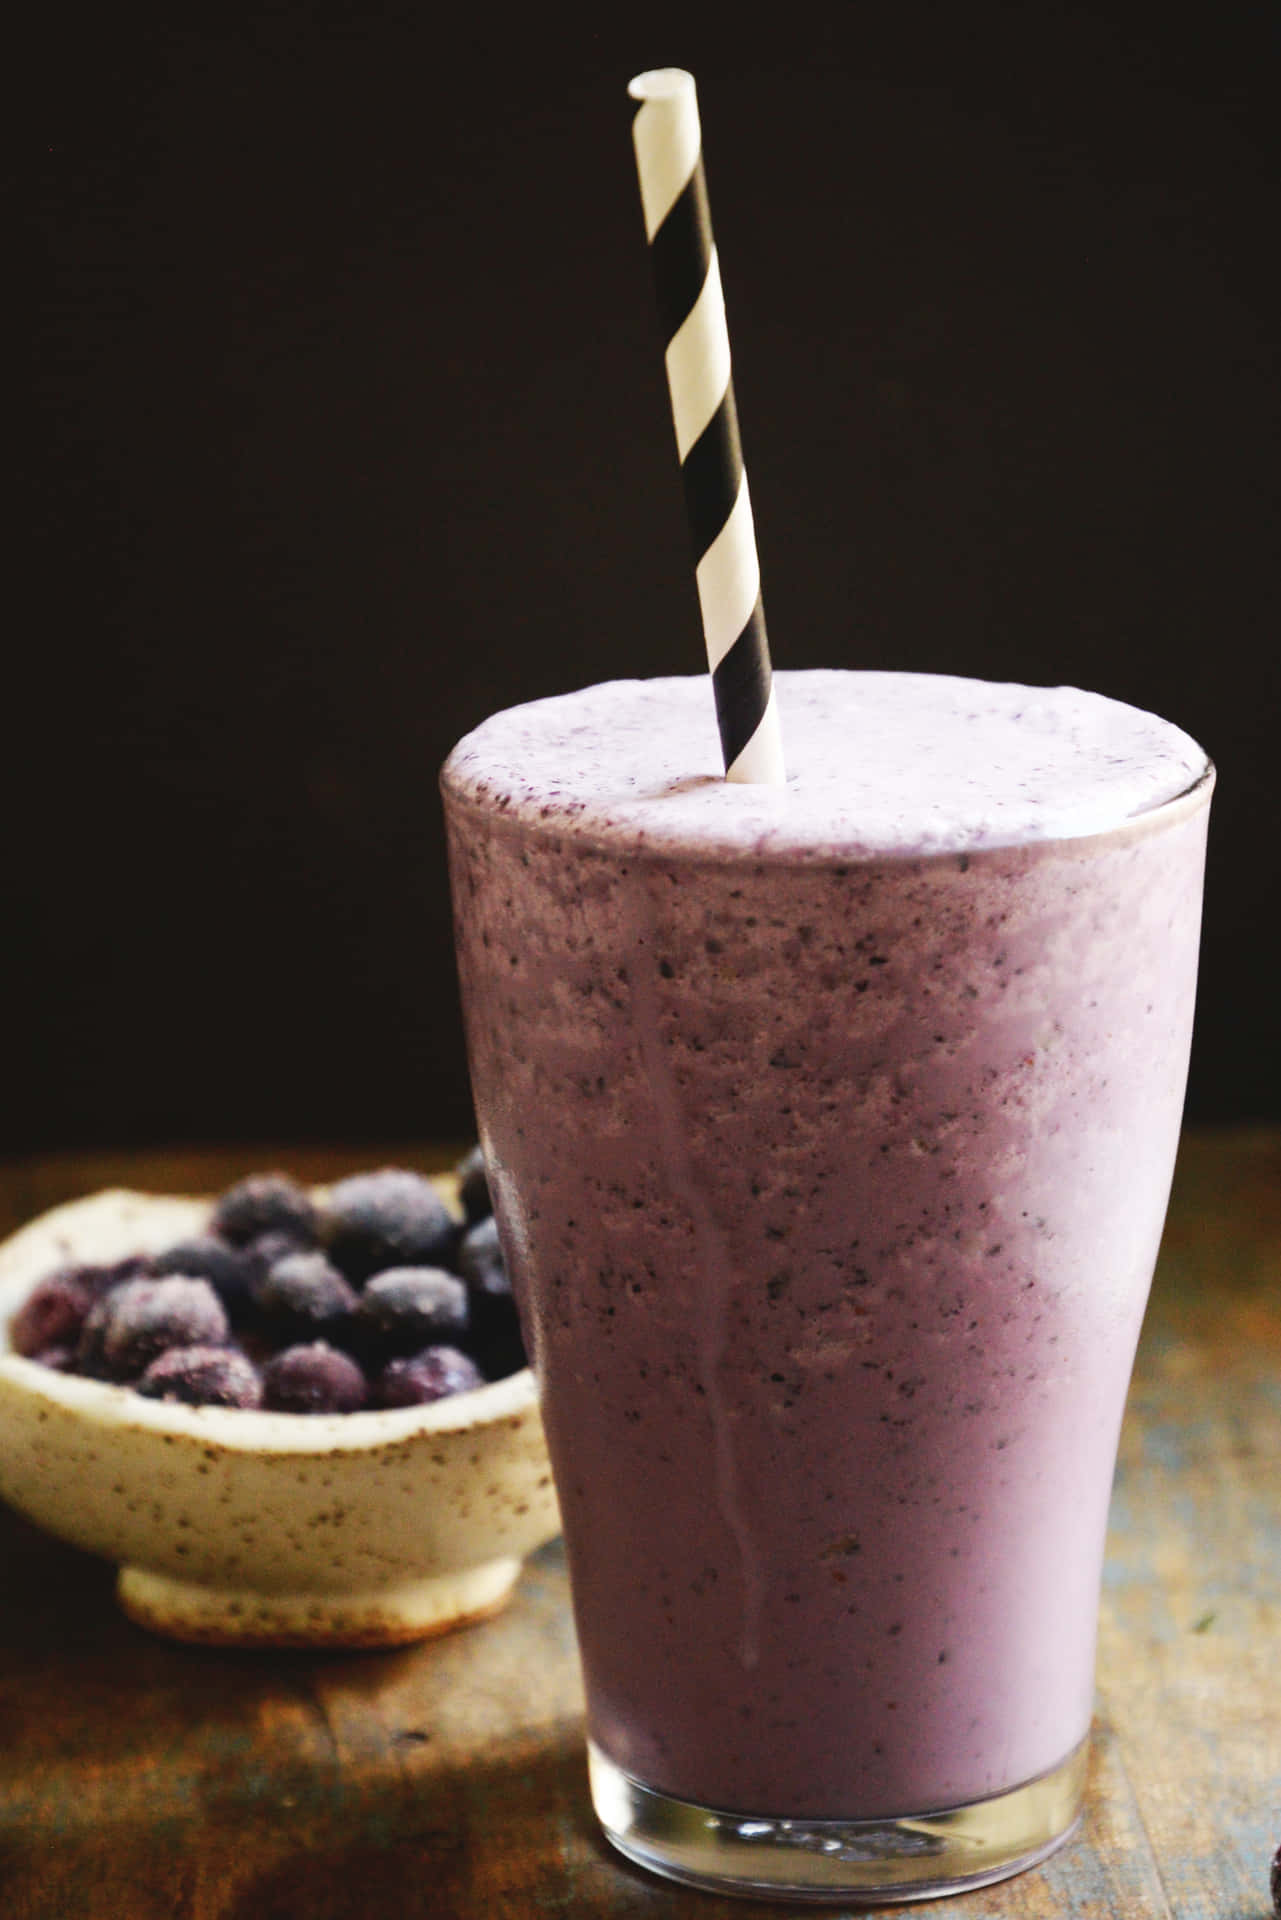 Refresh yourself with a delicious blueberry smoothie. Wallpaper